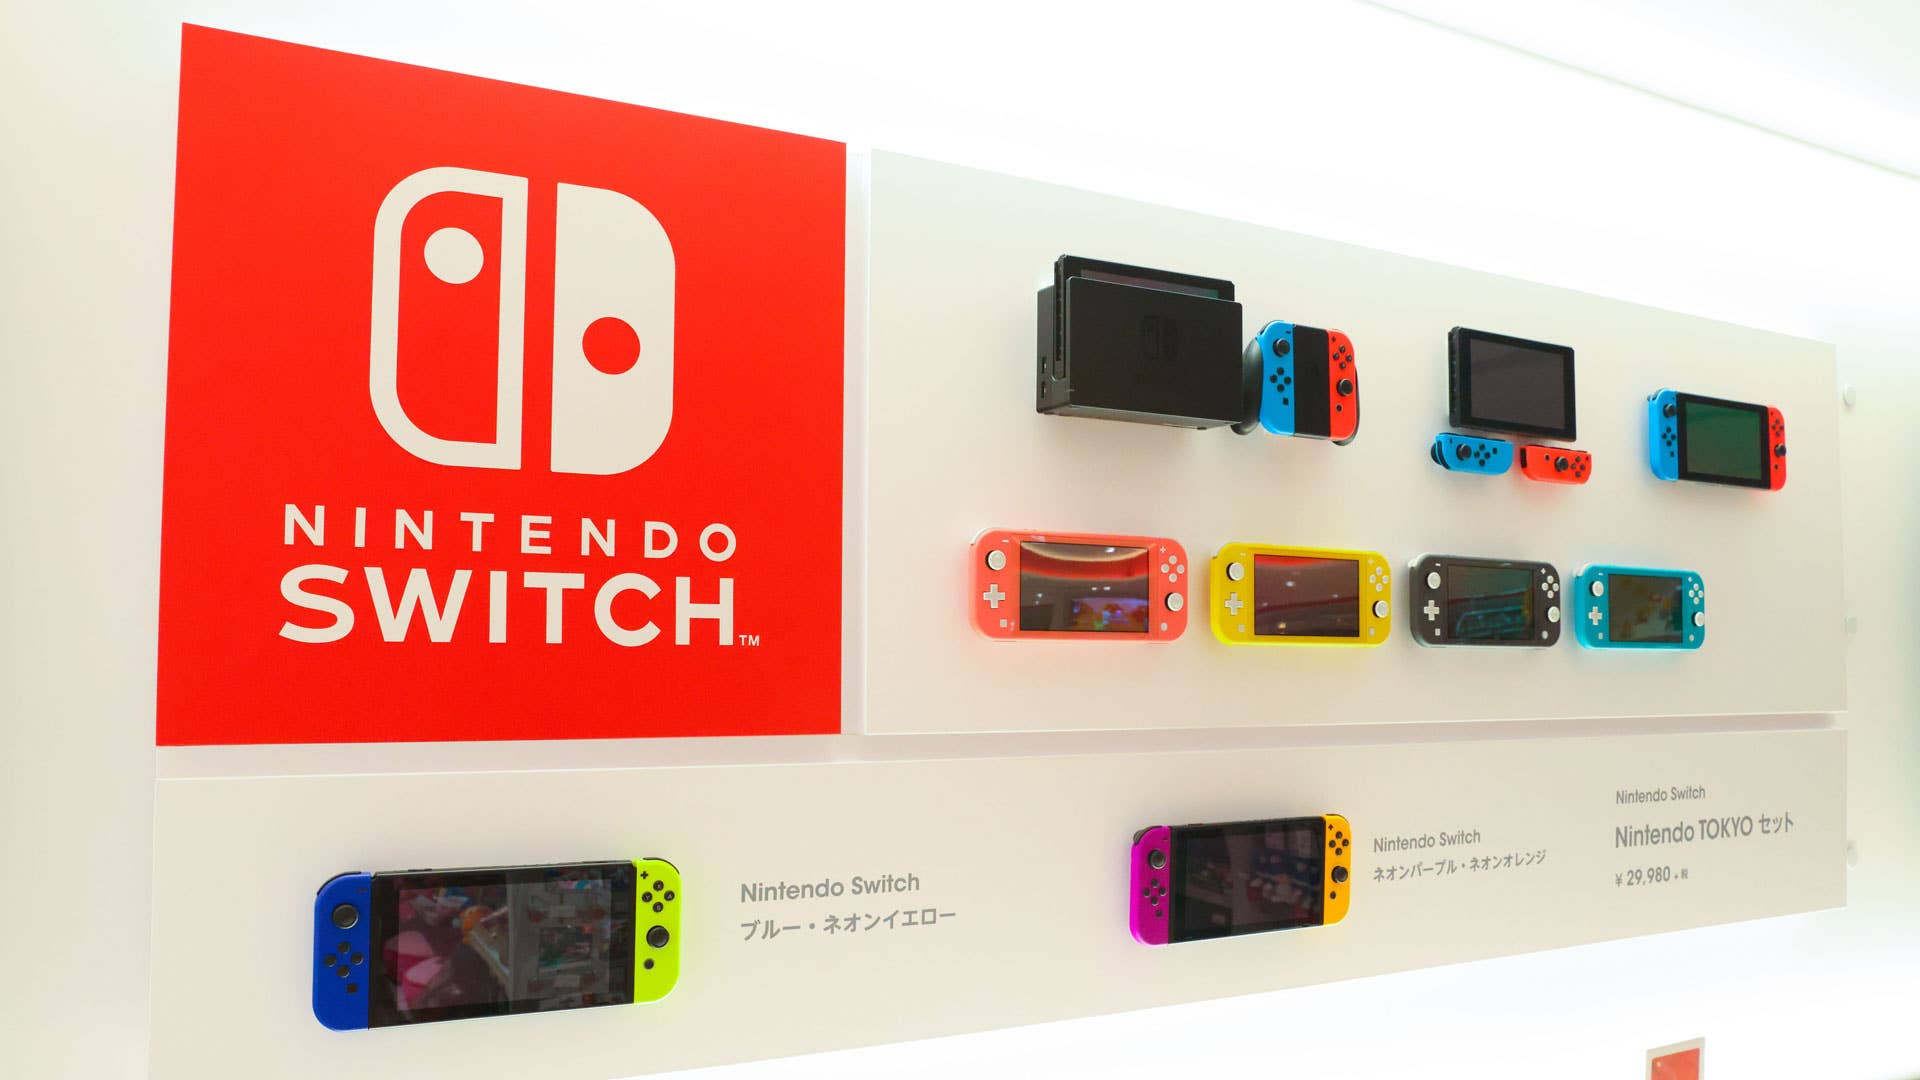 A wall of Nintendo Switches on display.